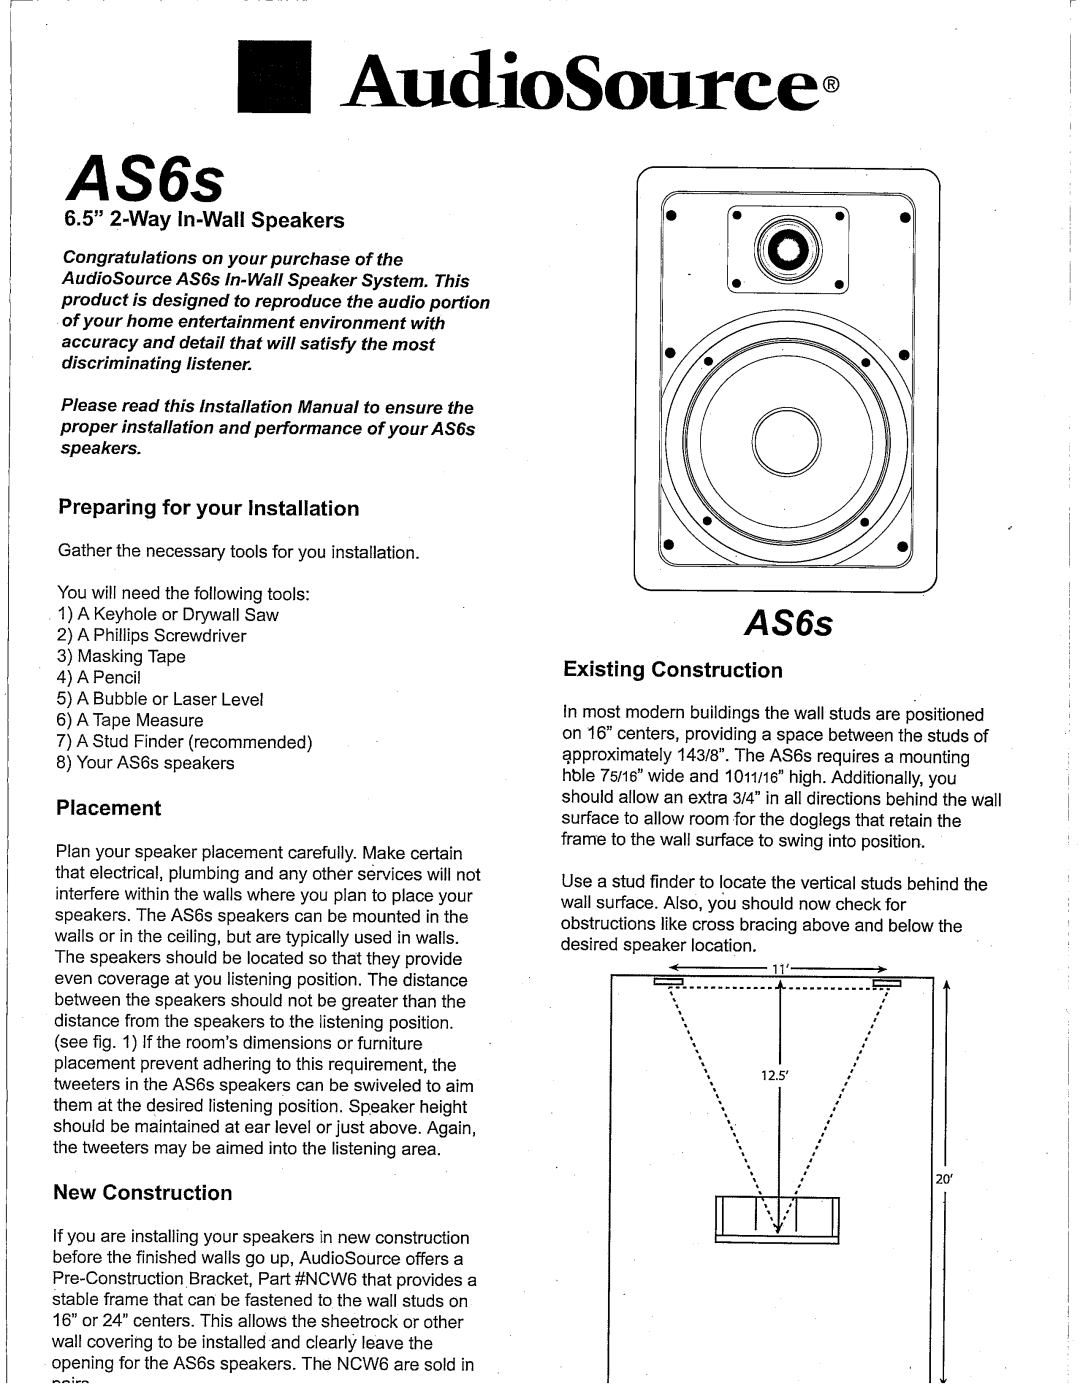 AudioSource 6.5" 2-Way In-Wall Speakers, AS6s manual 